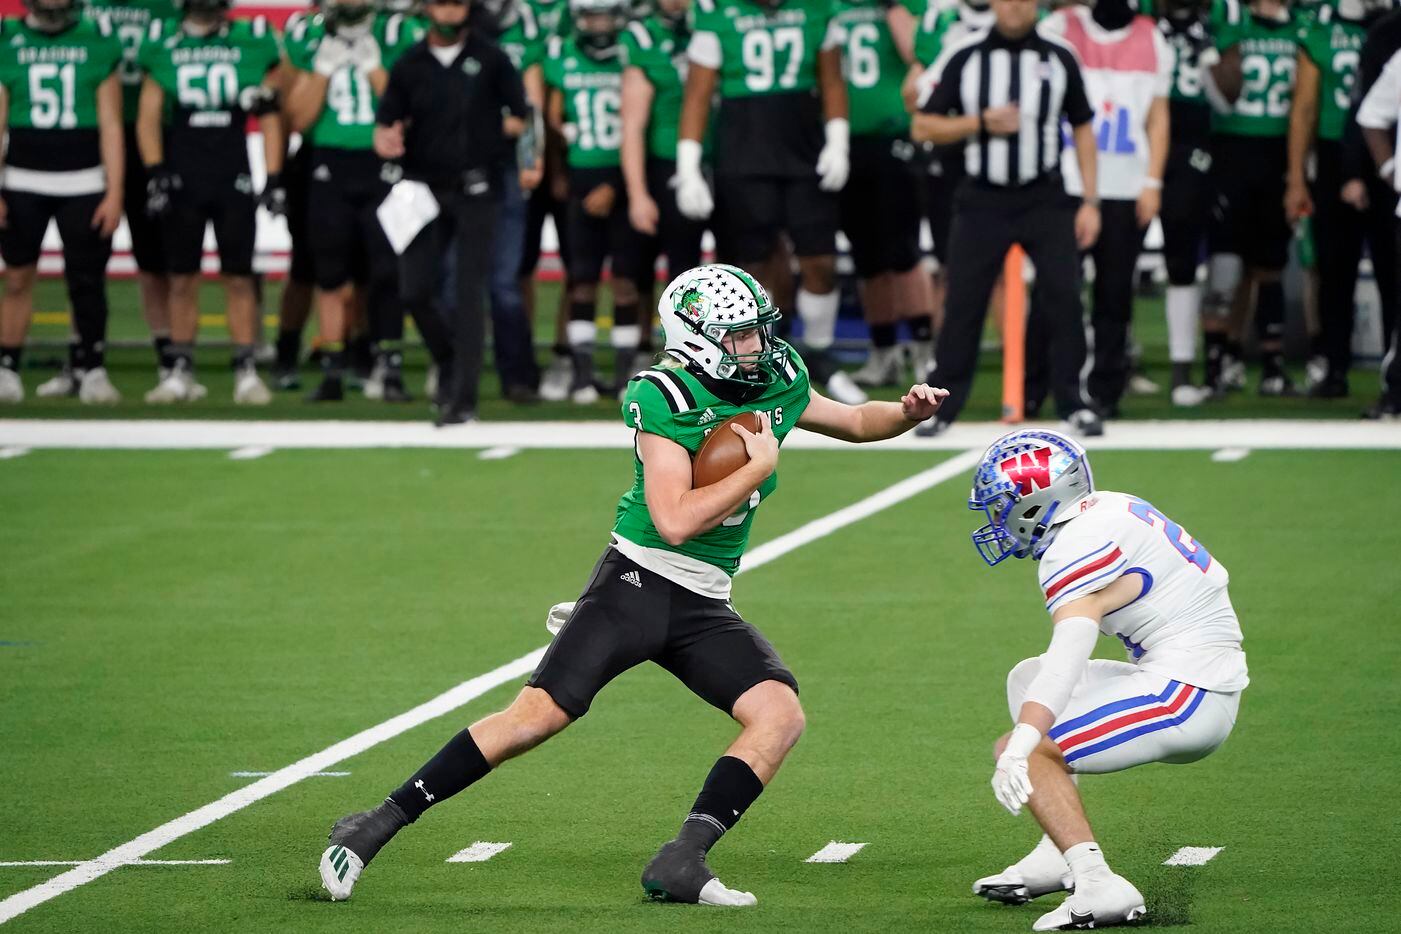 Southlake Carroll quarterback Quinn Ewers (3) tries to get past Austin Westlake defensive back Patrick Churchill (24) during the second quarter of the Class 6A Division I state football championship game at AT&T Stadium on Saturday, Jan. 16, 2021, in Arlington, Texas. (Smiley N. Pool/The Dallas Morning News)